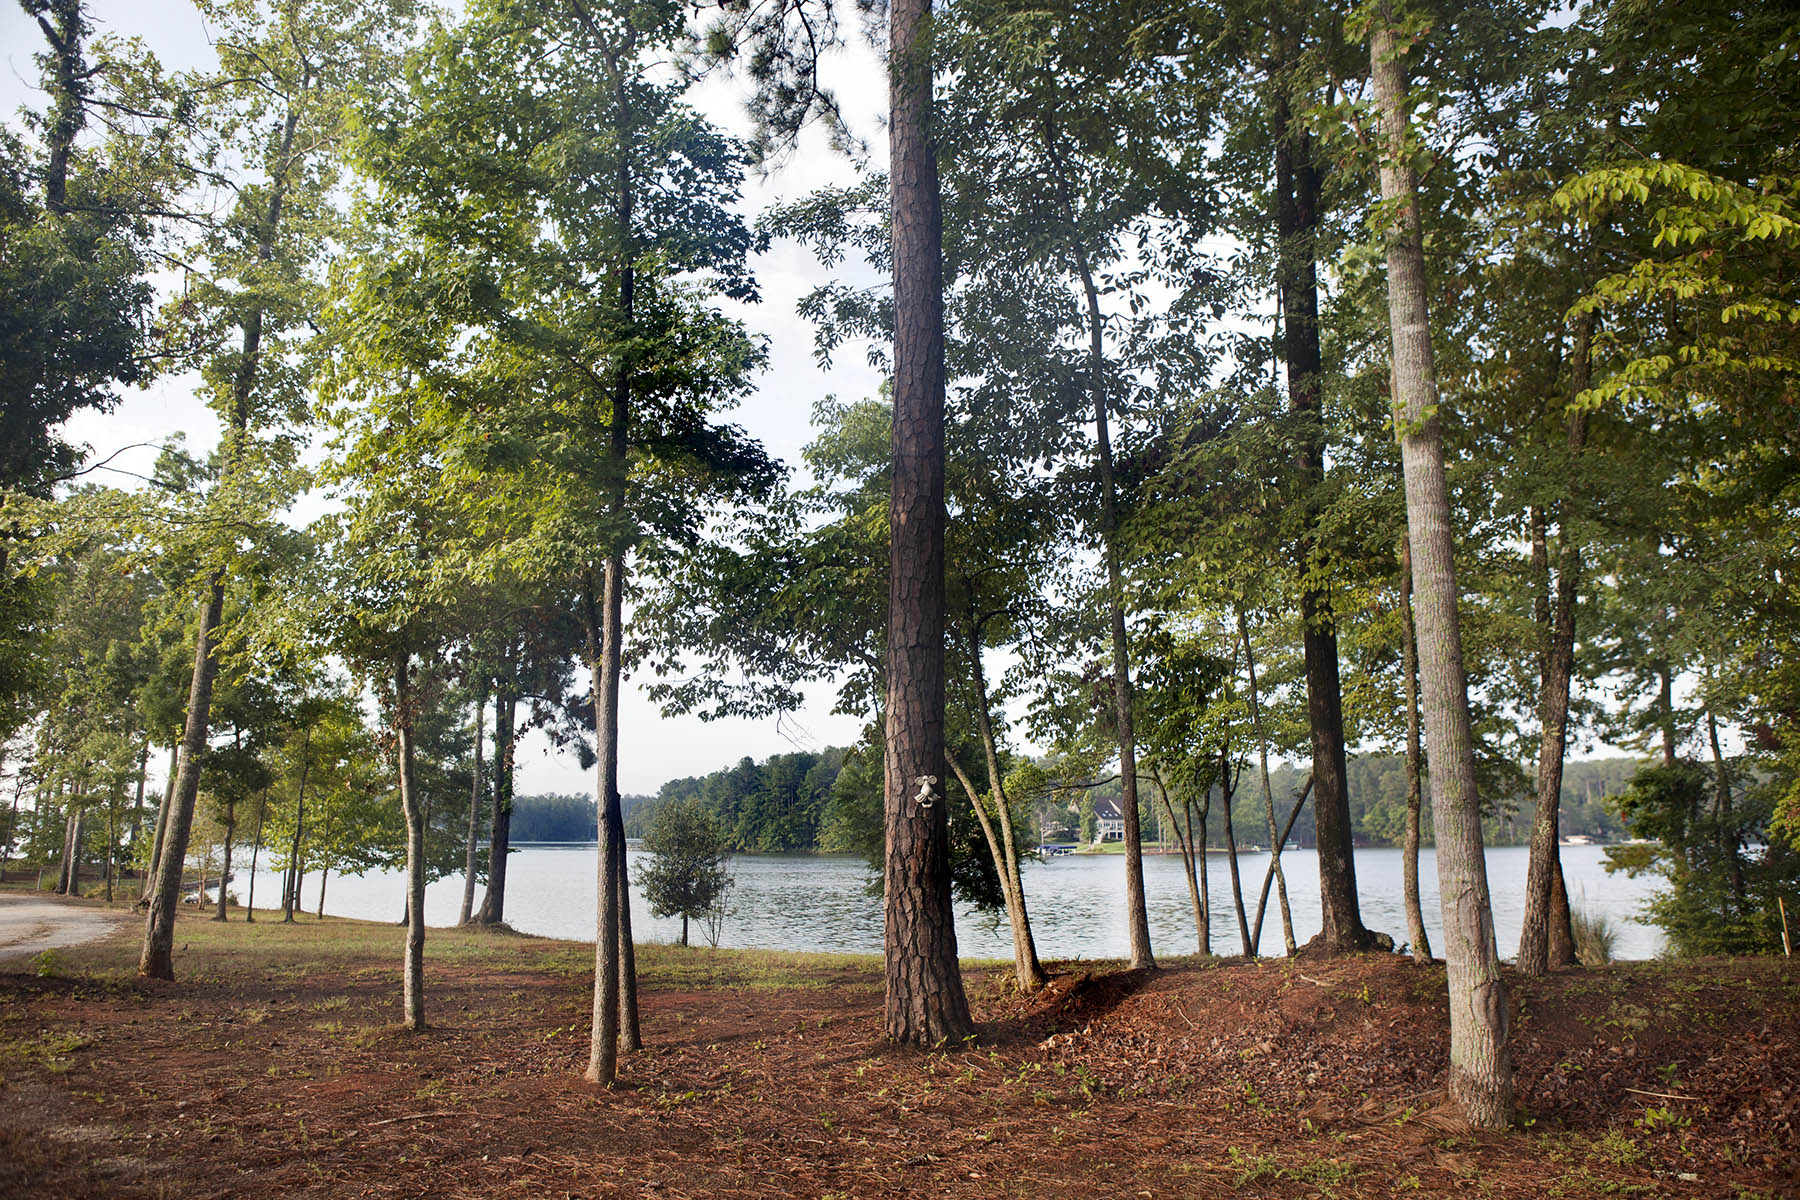 Lakeside community in Georgia called Lake Oconee showing view of water through pine trees and house on other side of the bank